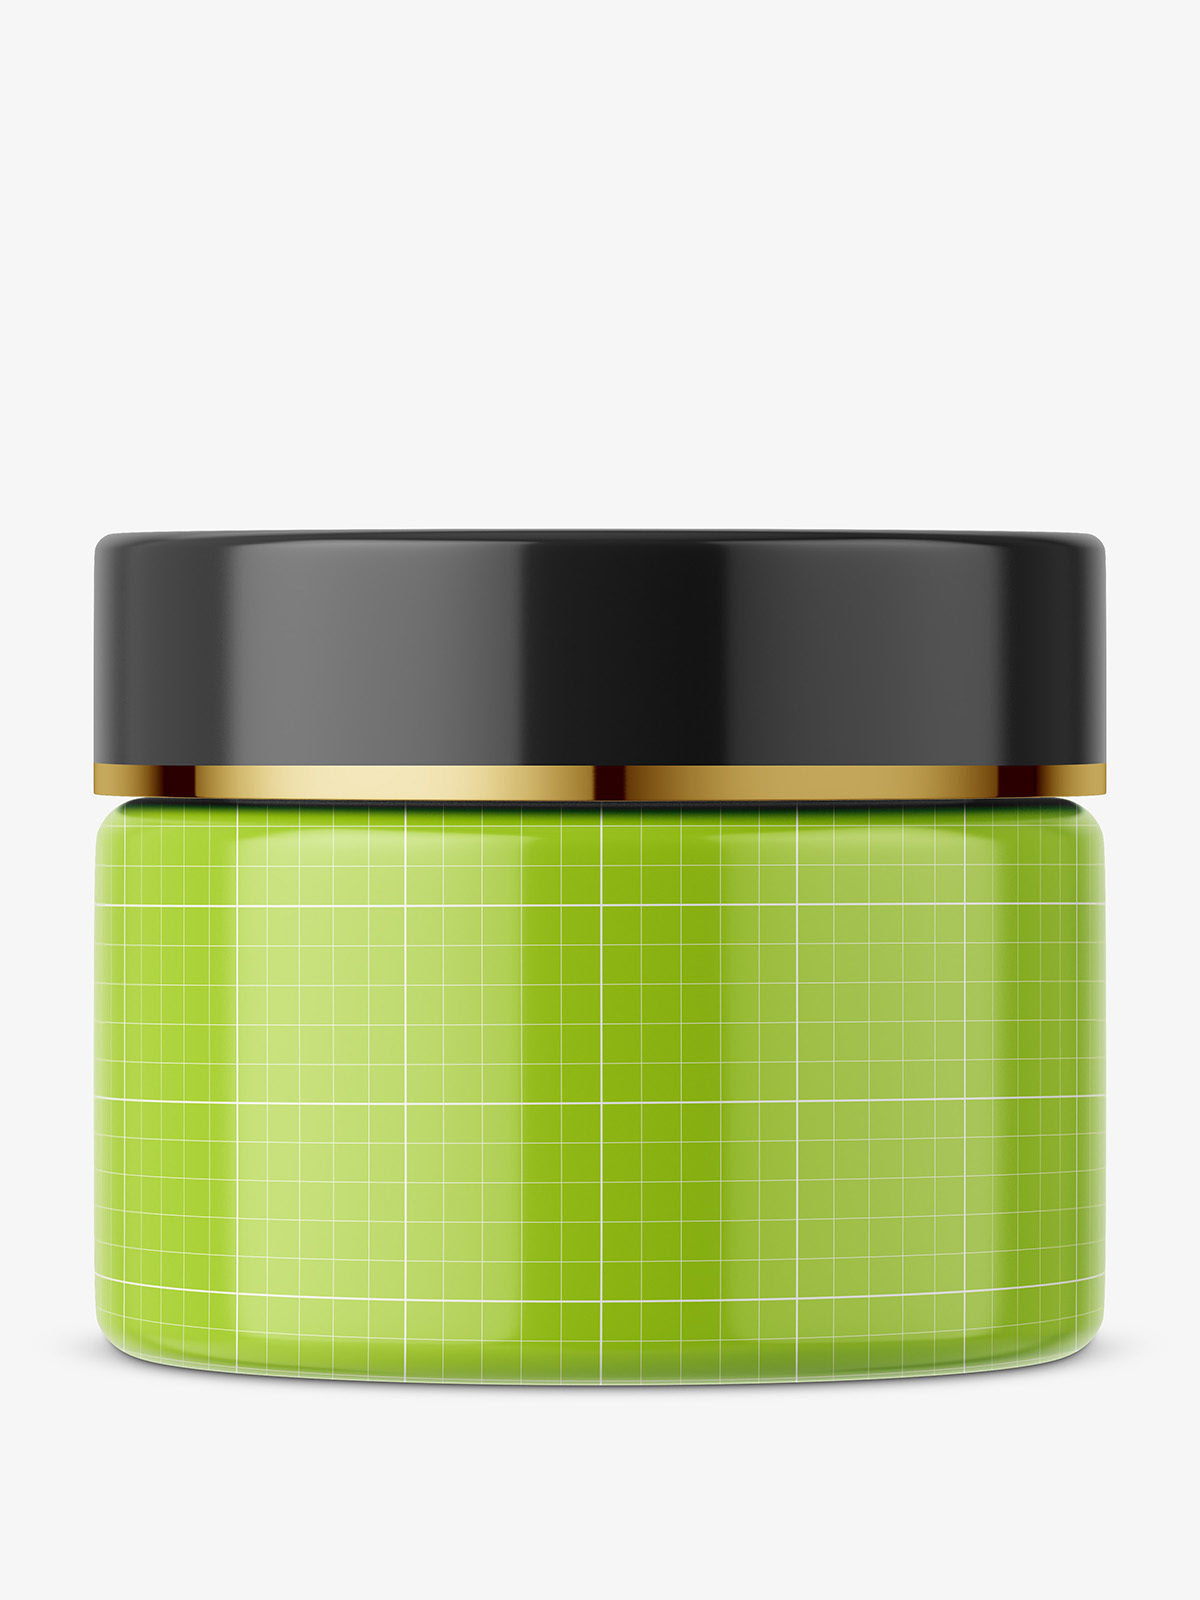 Download 137+ Opened Frosted Green Glass Cosmetic Jar Mockup